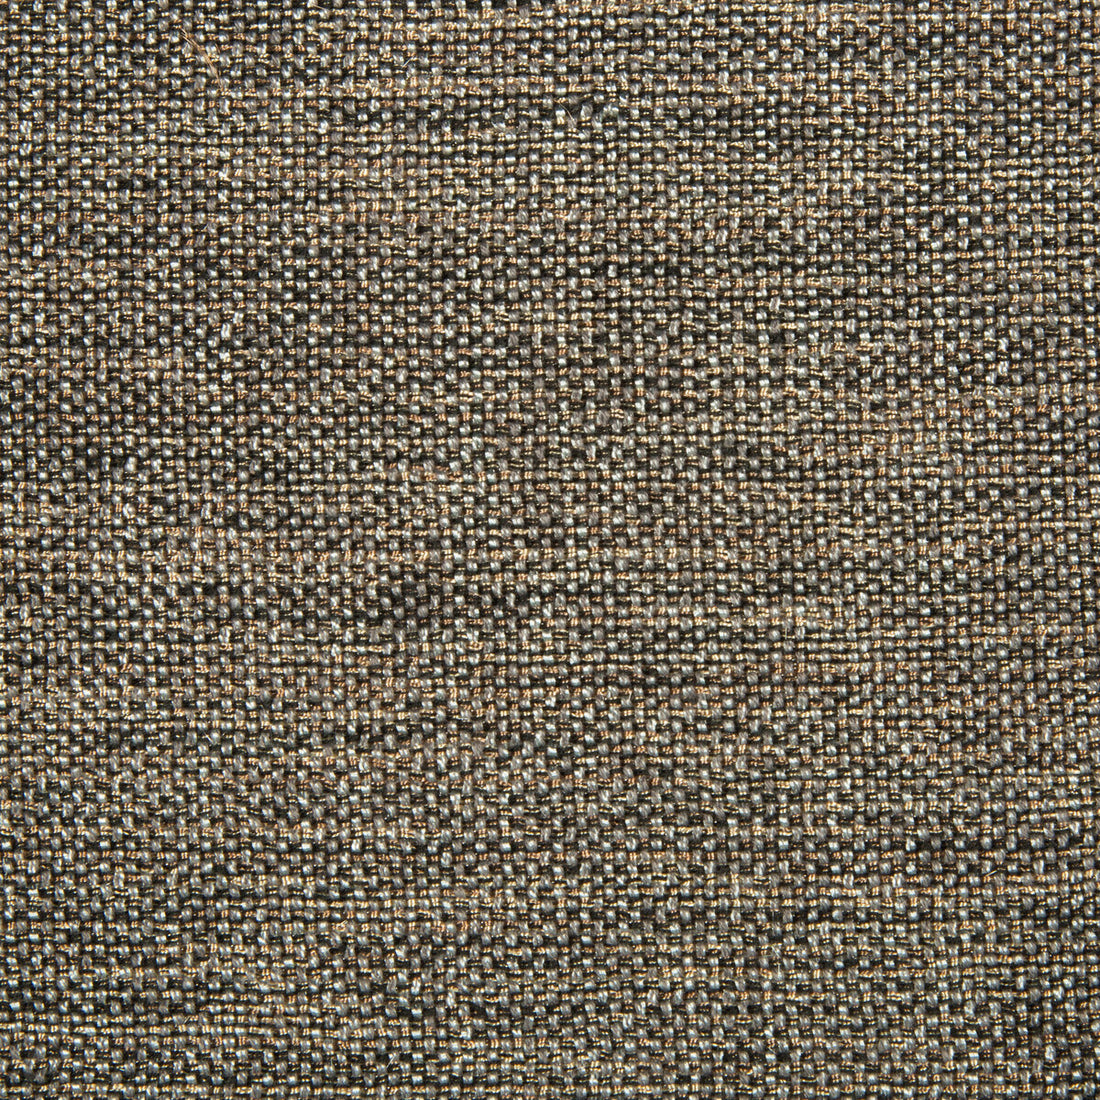 Kravet Contract fabric in 34926-8 color - pattern 34926.8.0 - by Kravet Contract